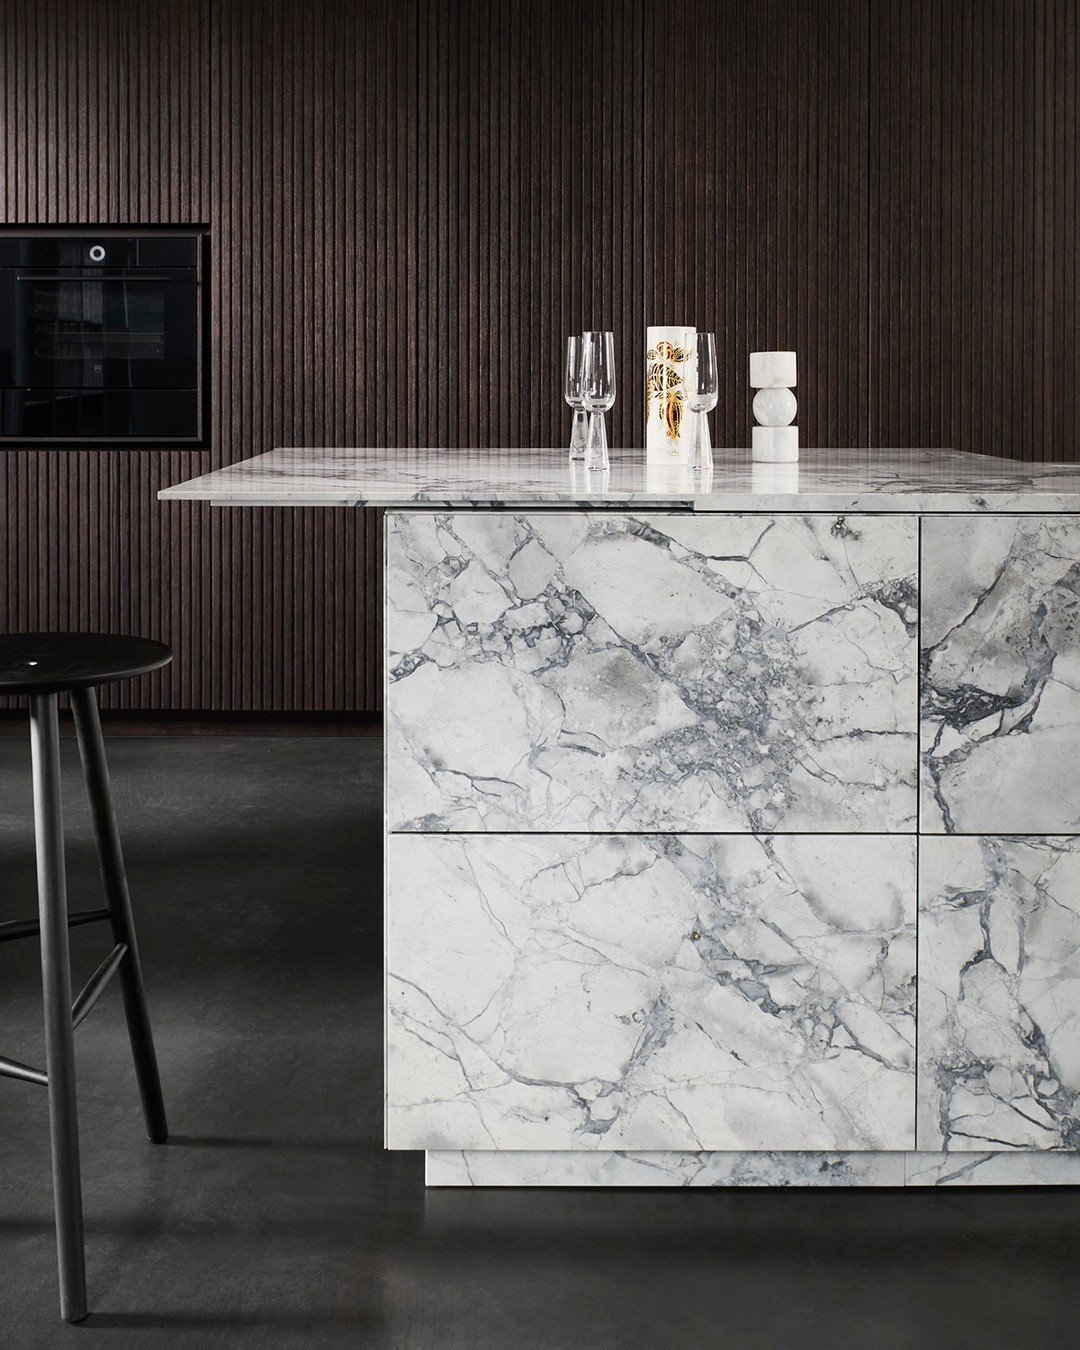 An elegant pairing of dramatically veined white 'Bianco Nuvola' quartzite against a backdrop of slatted oak veneer makes a striking contrast.⁠
⁠
A beautiful example of how @eggersmann_official elements can be used to create stunning kitchen spaces.⁠
